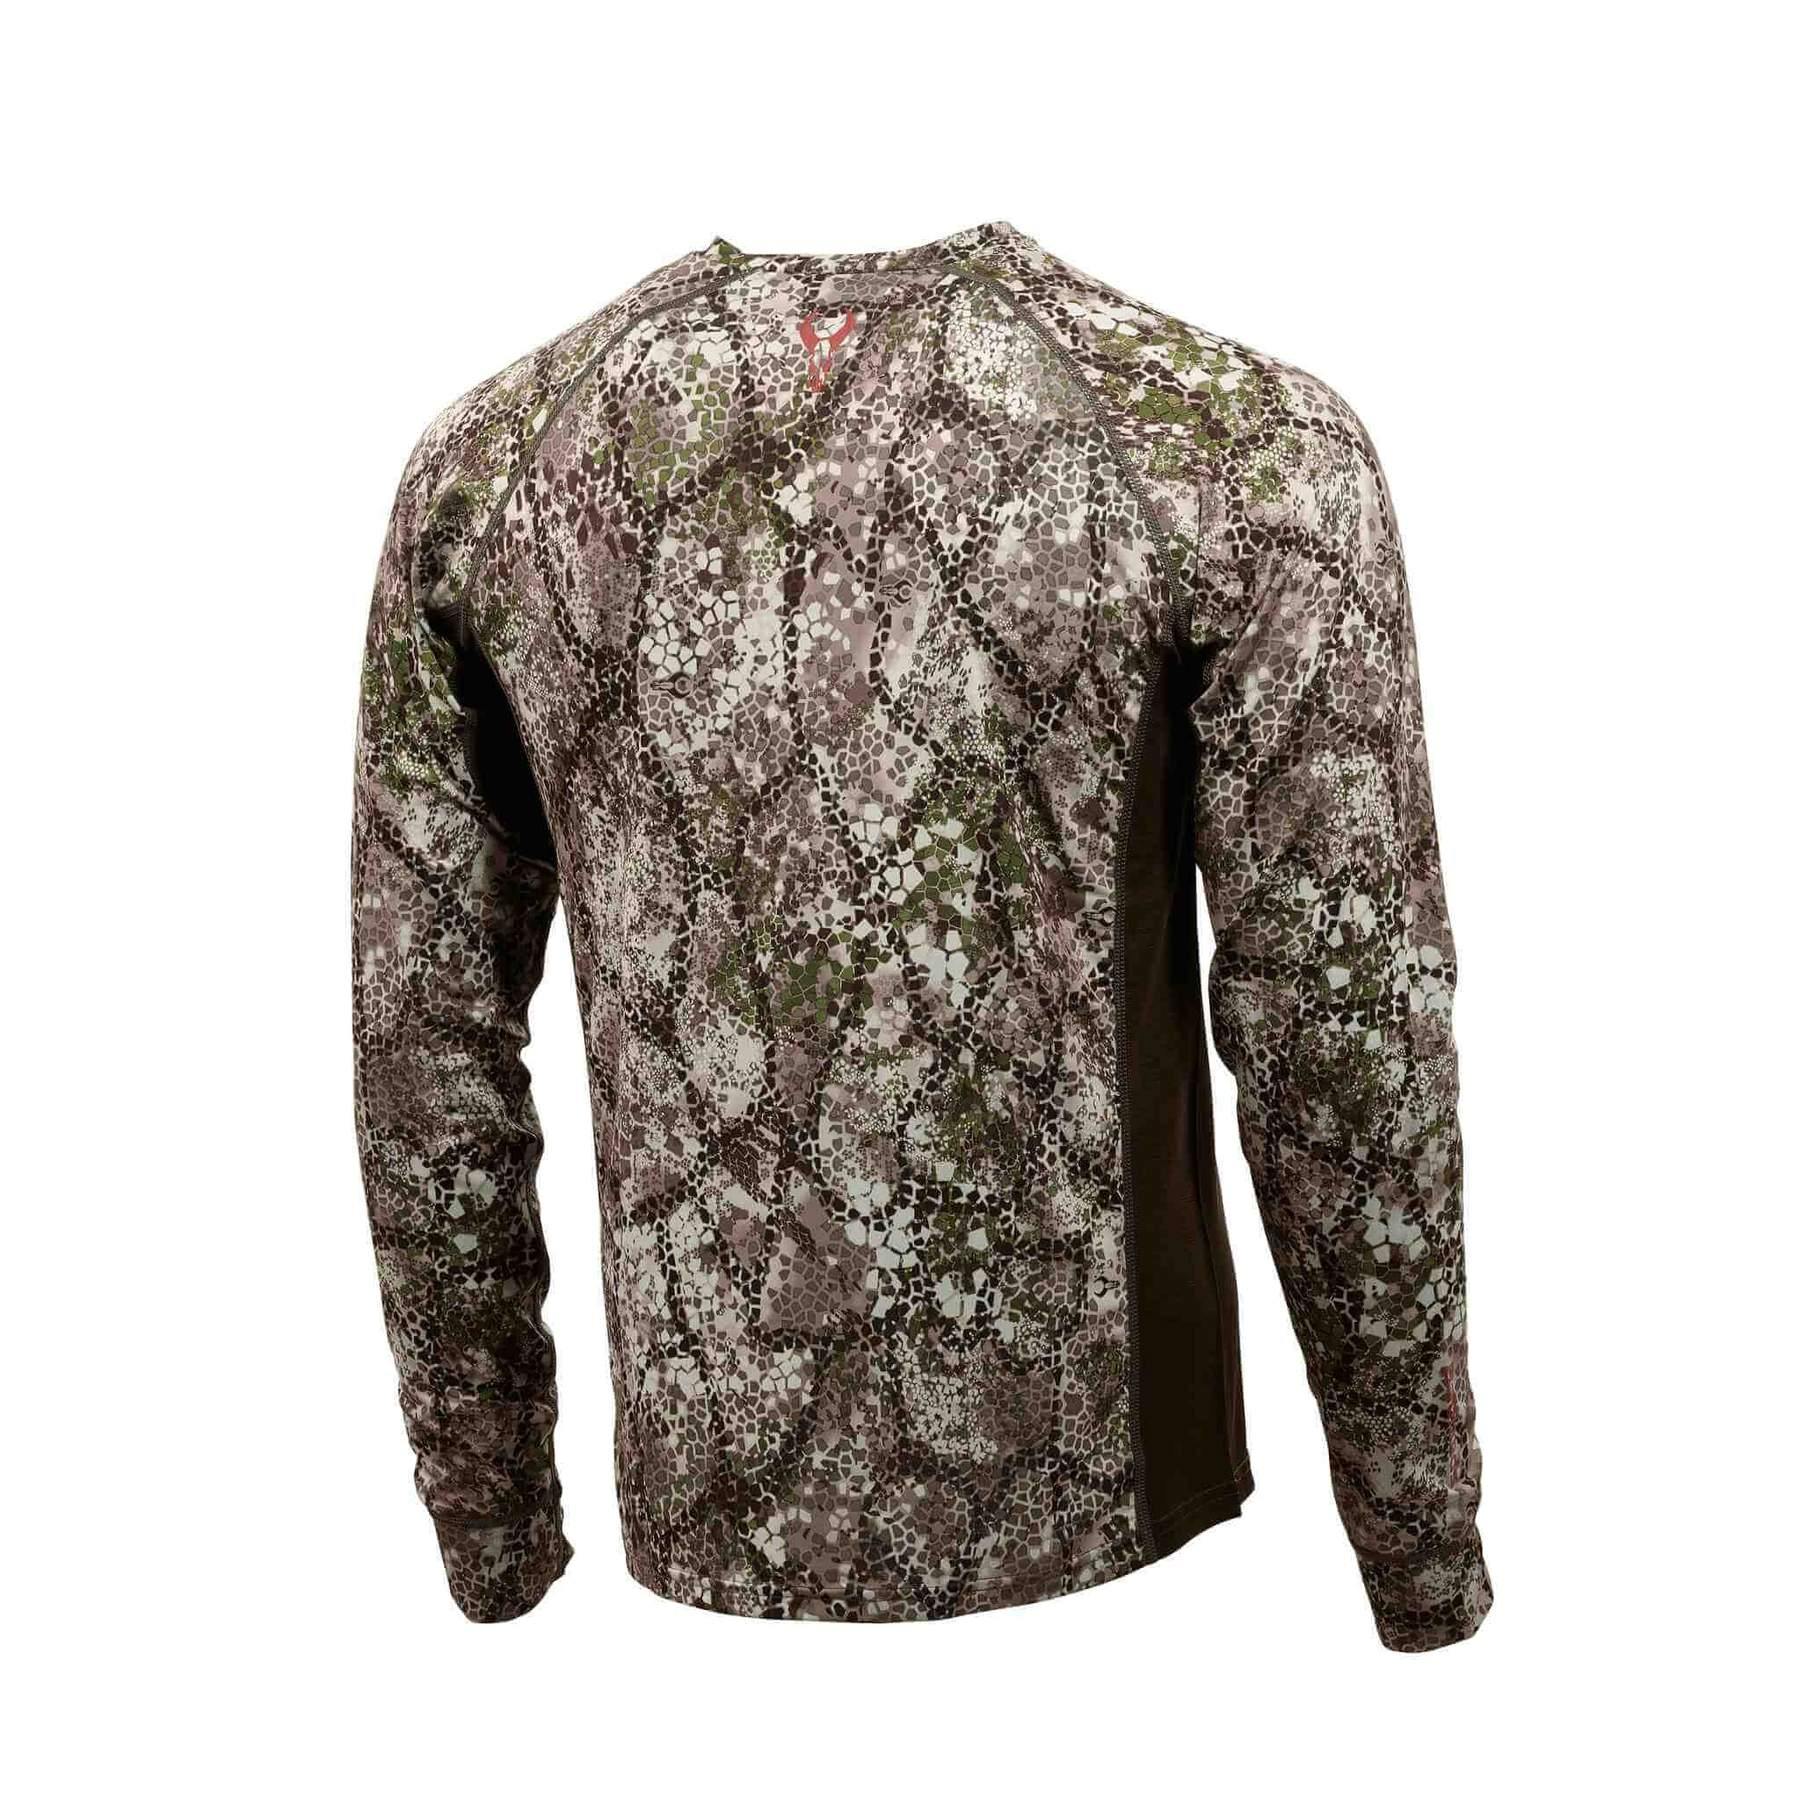 Badlands Algus Long Sleeve Crew - Leapfrog Outdoor Sports and Apparel